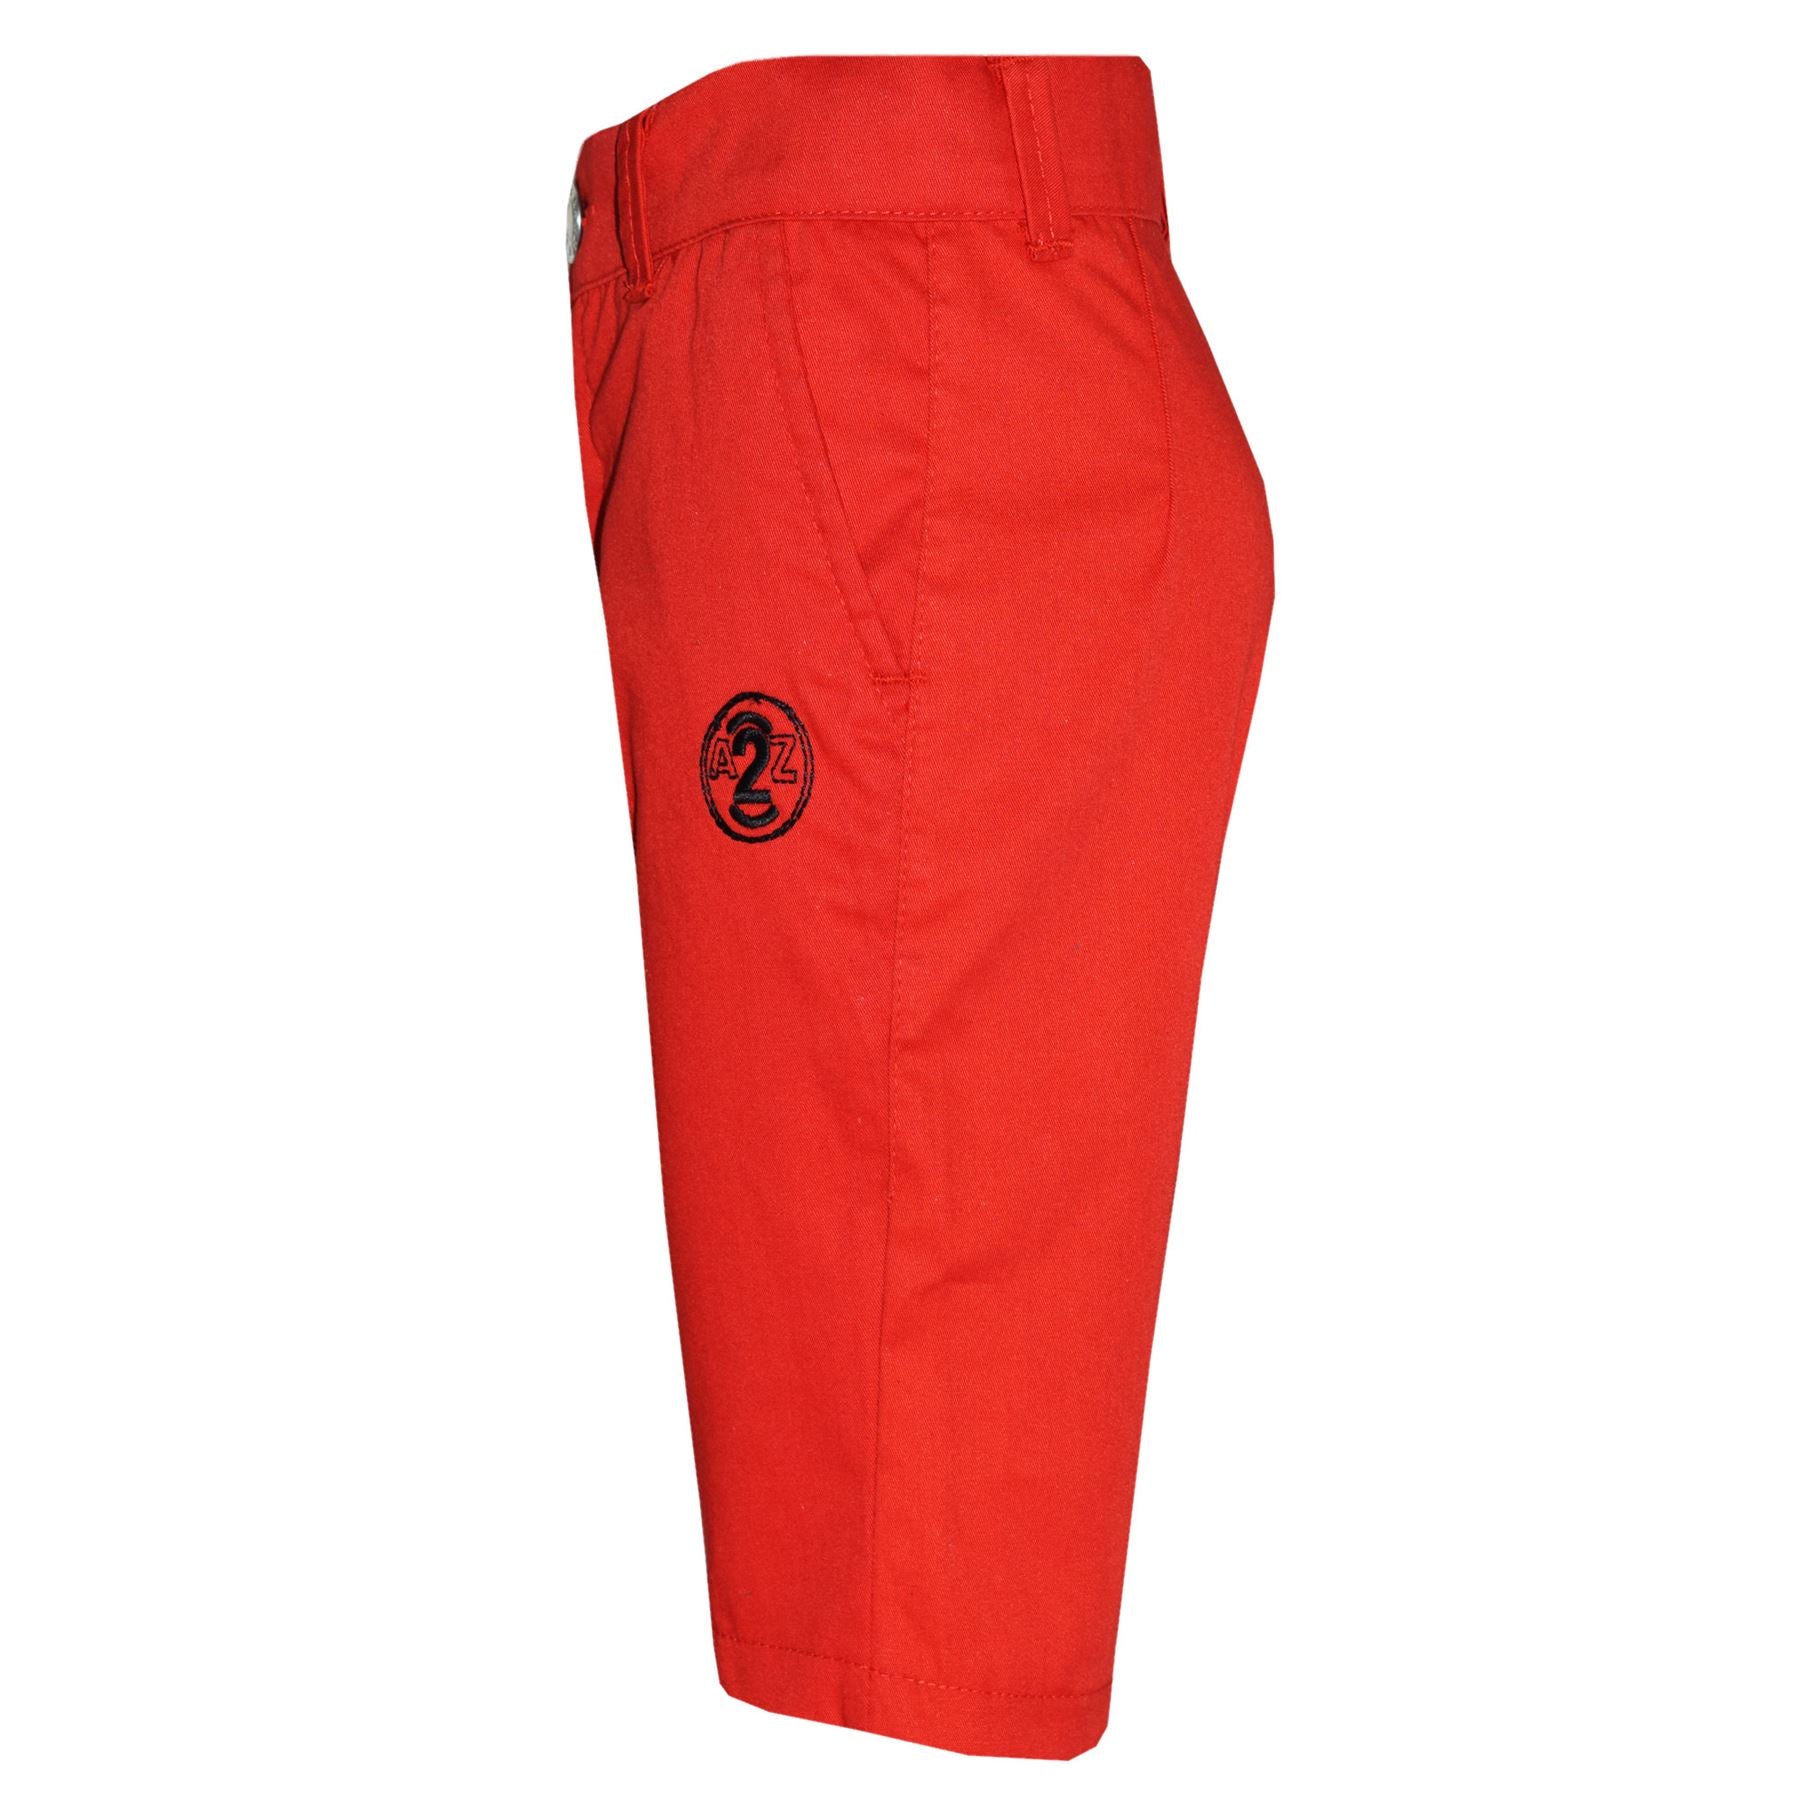 Boys Summer Cotton Shorts Red Chino Knee Length